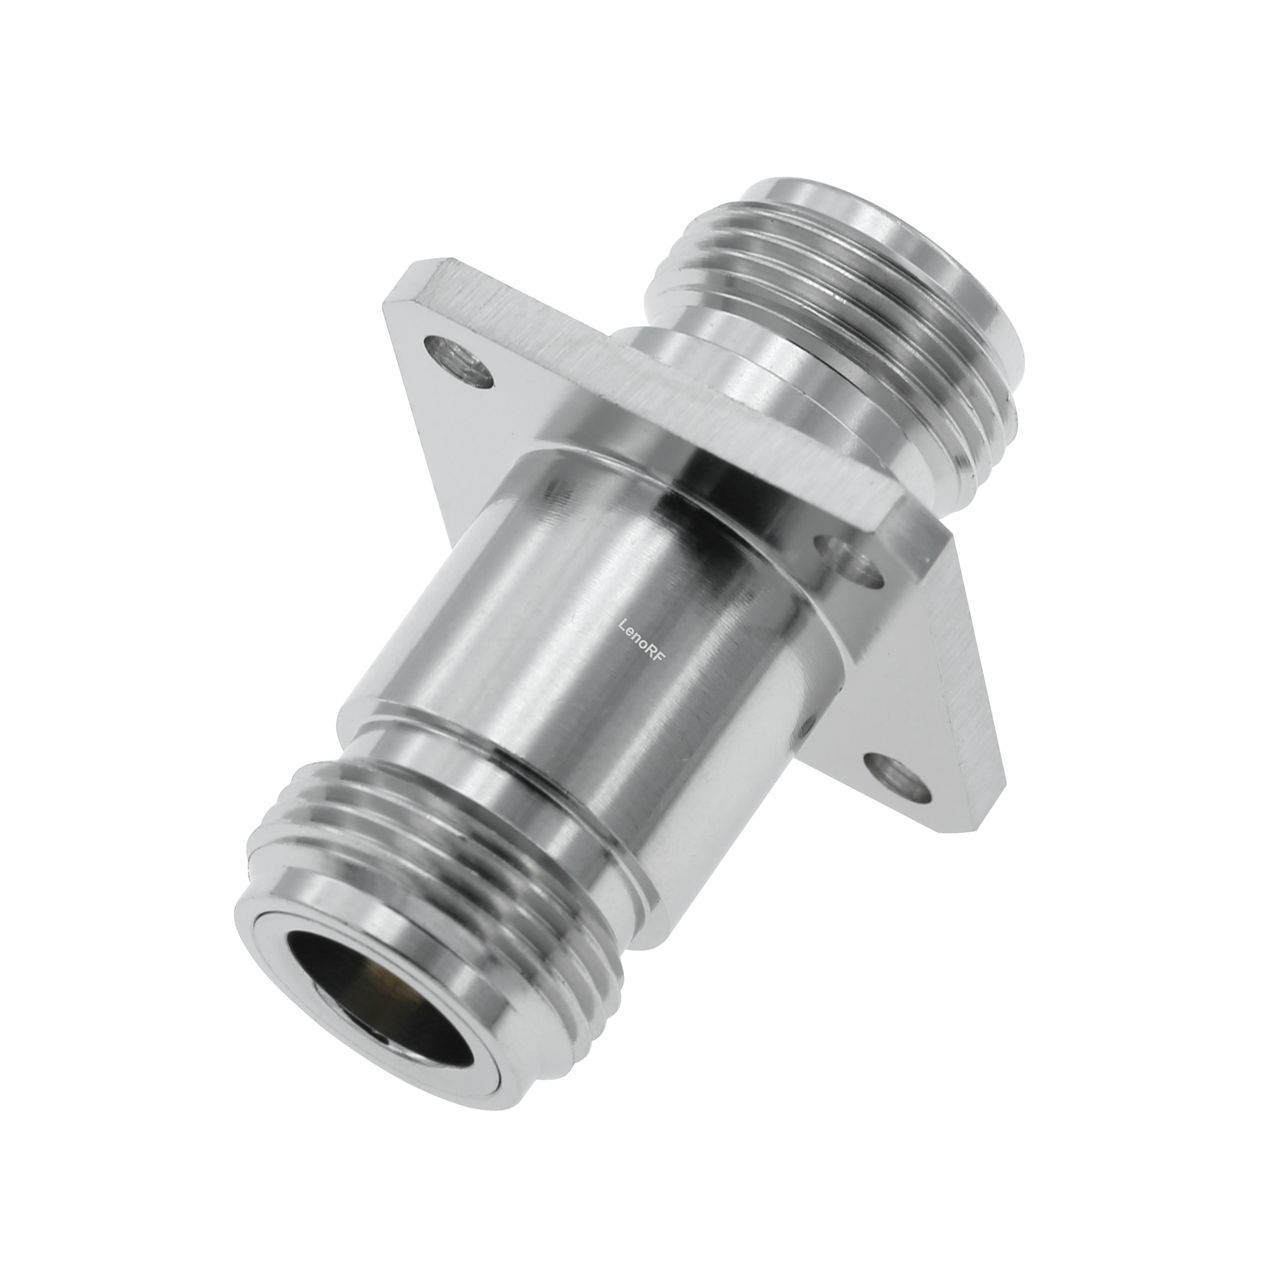 N Jack To Jack Straight Flange Mount Stainless Steel Adapter 